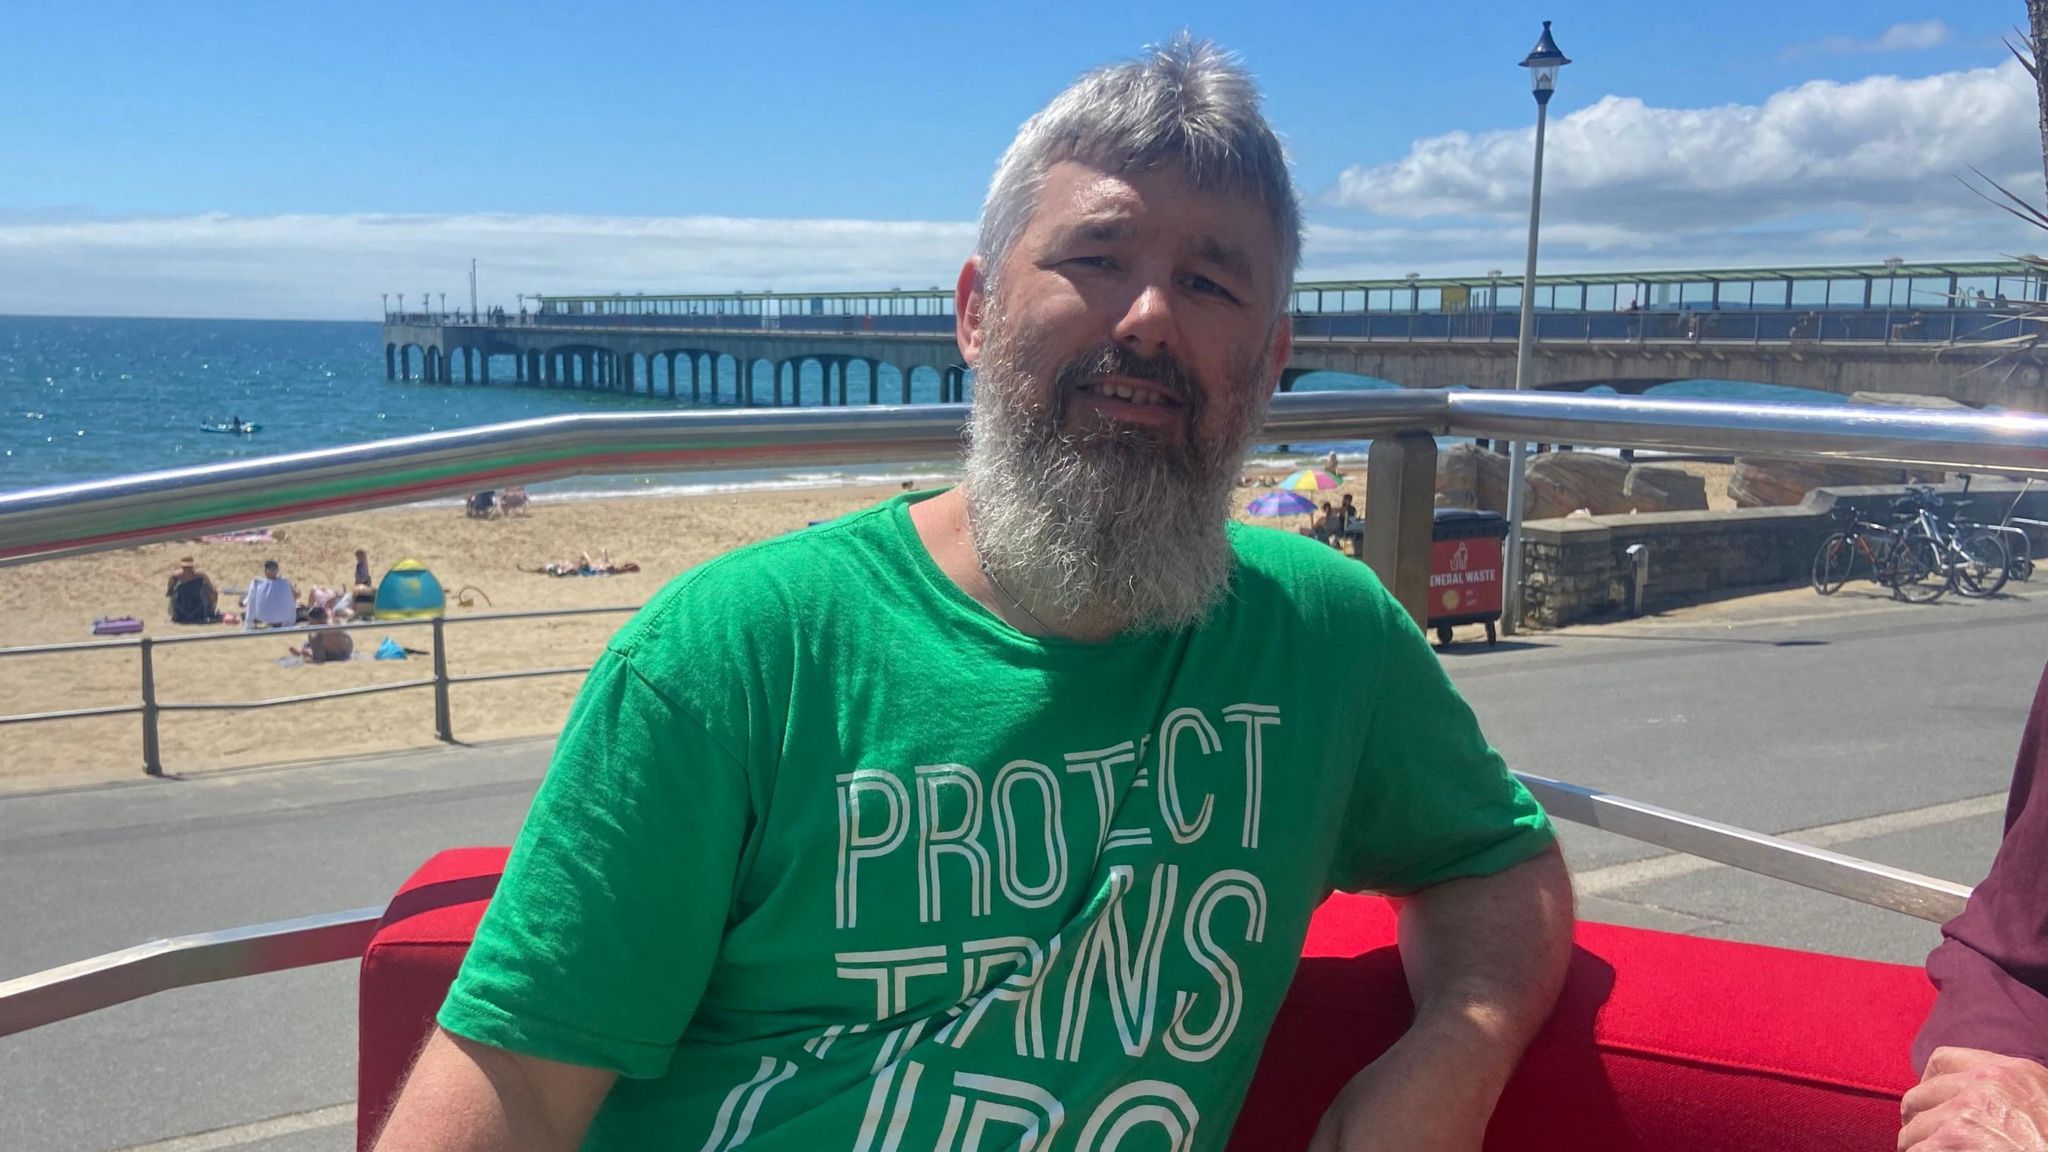 The Green Party's Joe Salmon is wearing a green t-shirt and has a grey beard. He sits on a red sofa.